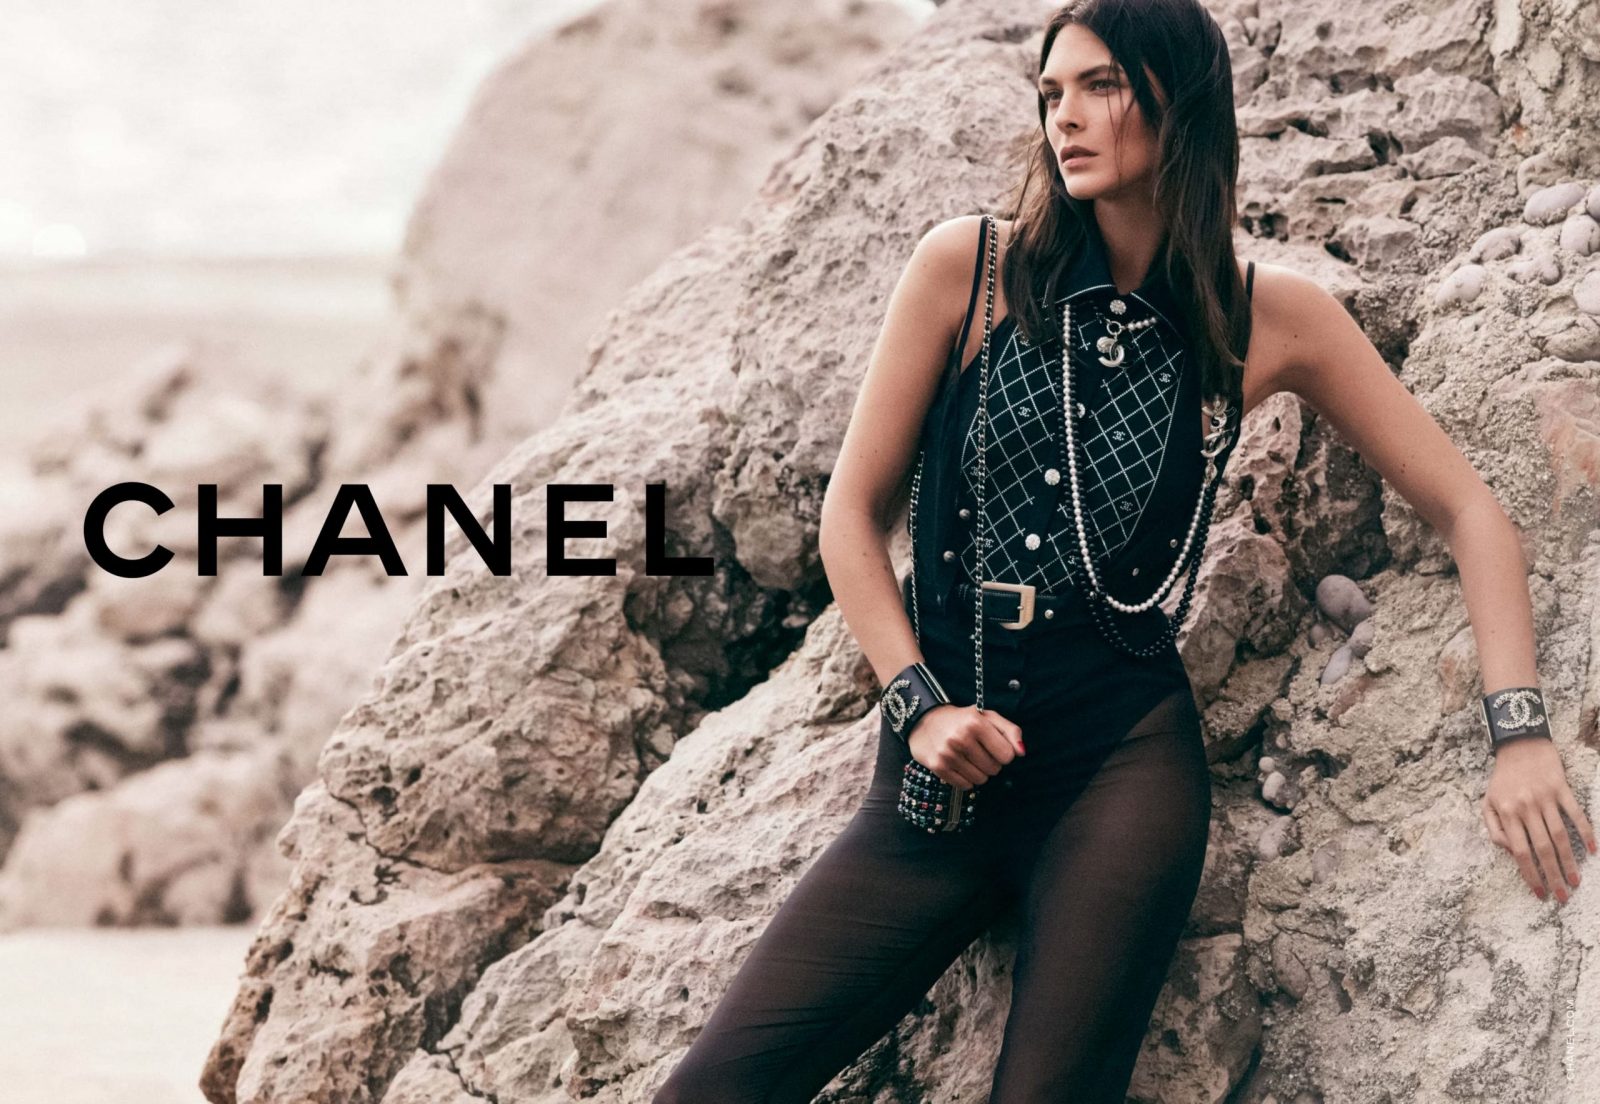 Why Is Chanel Worth So Much?